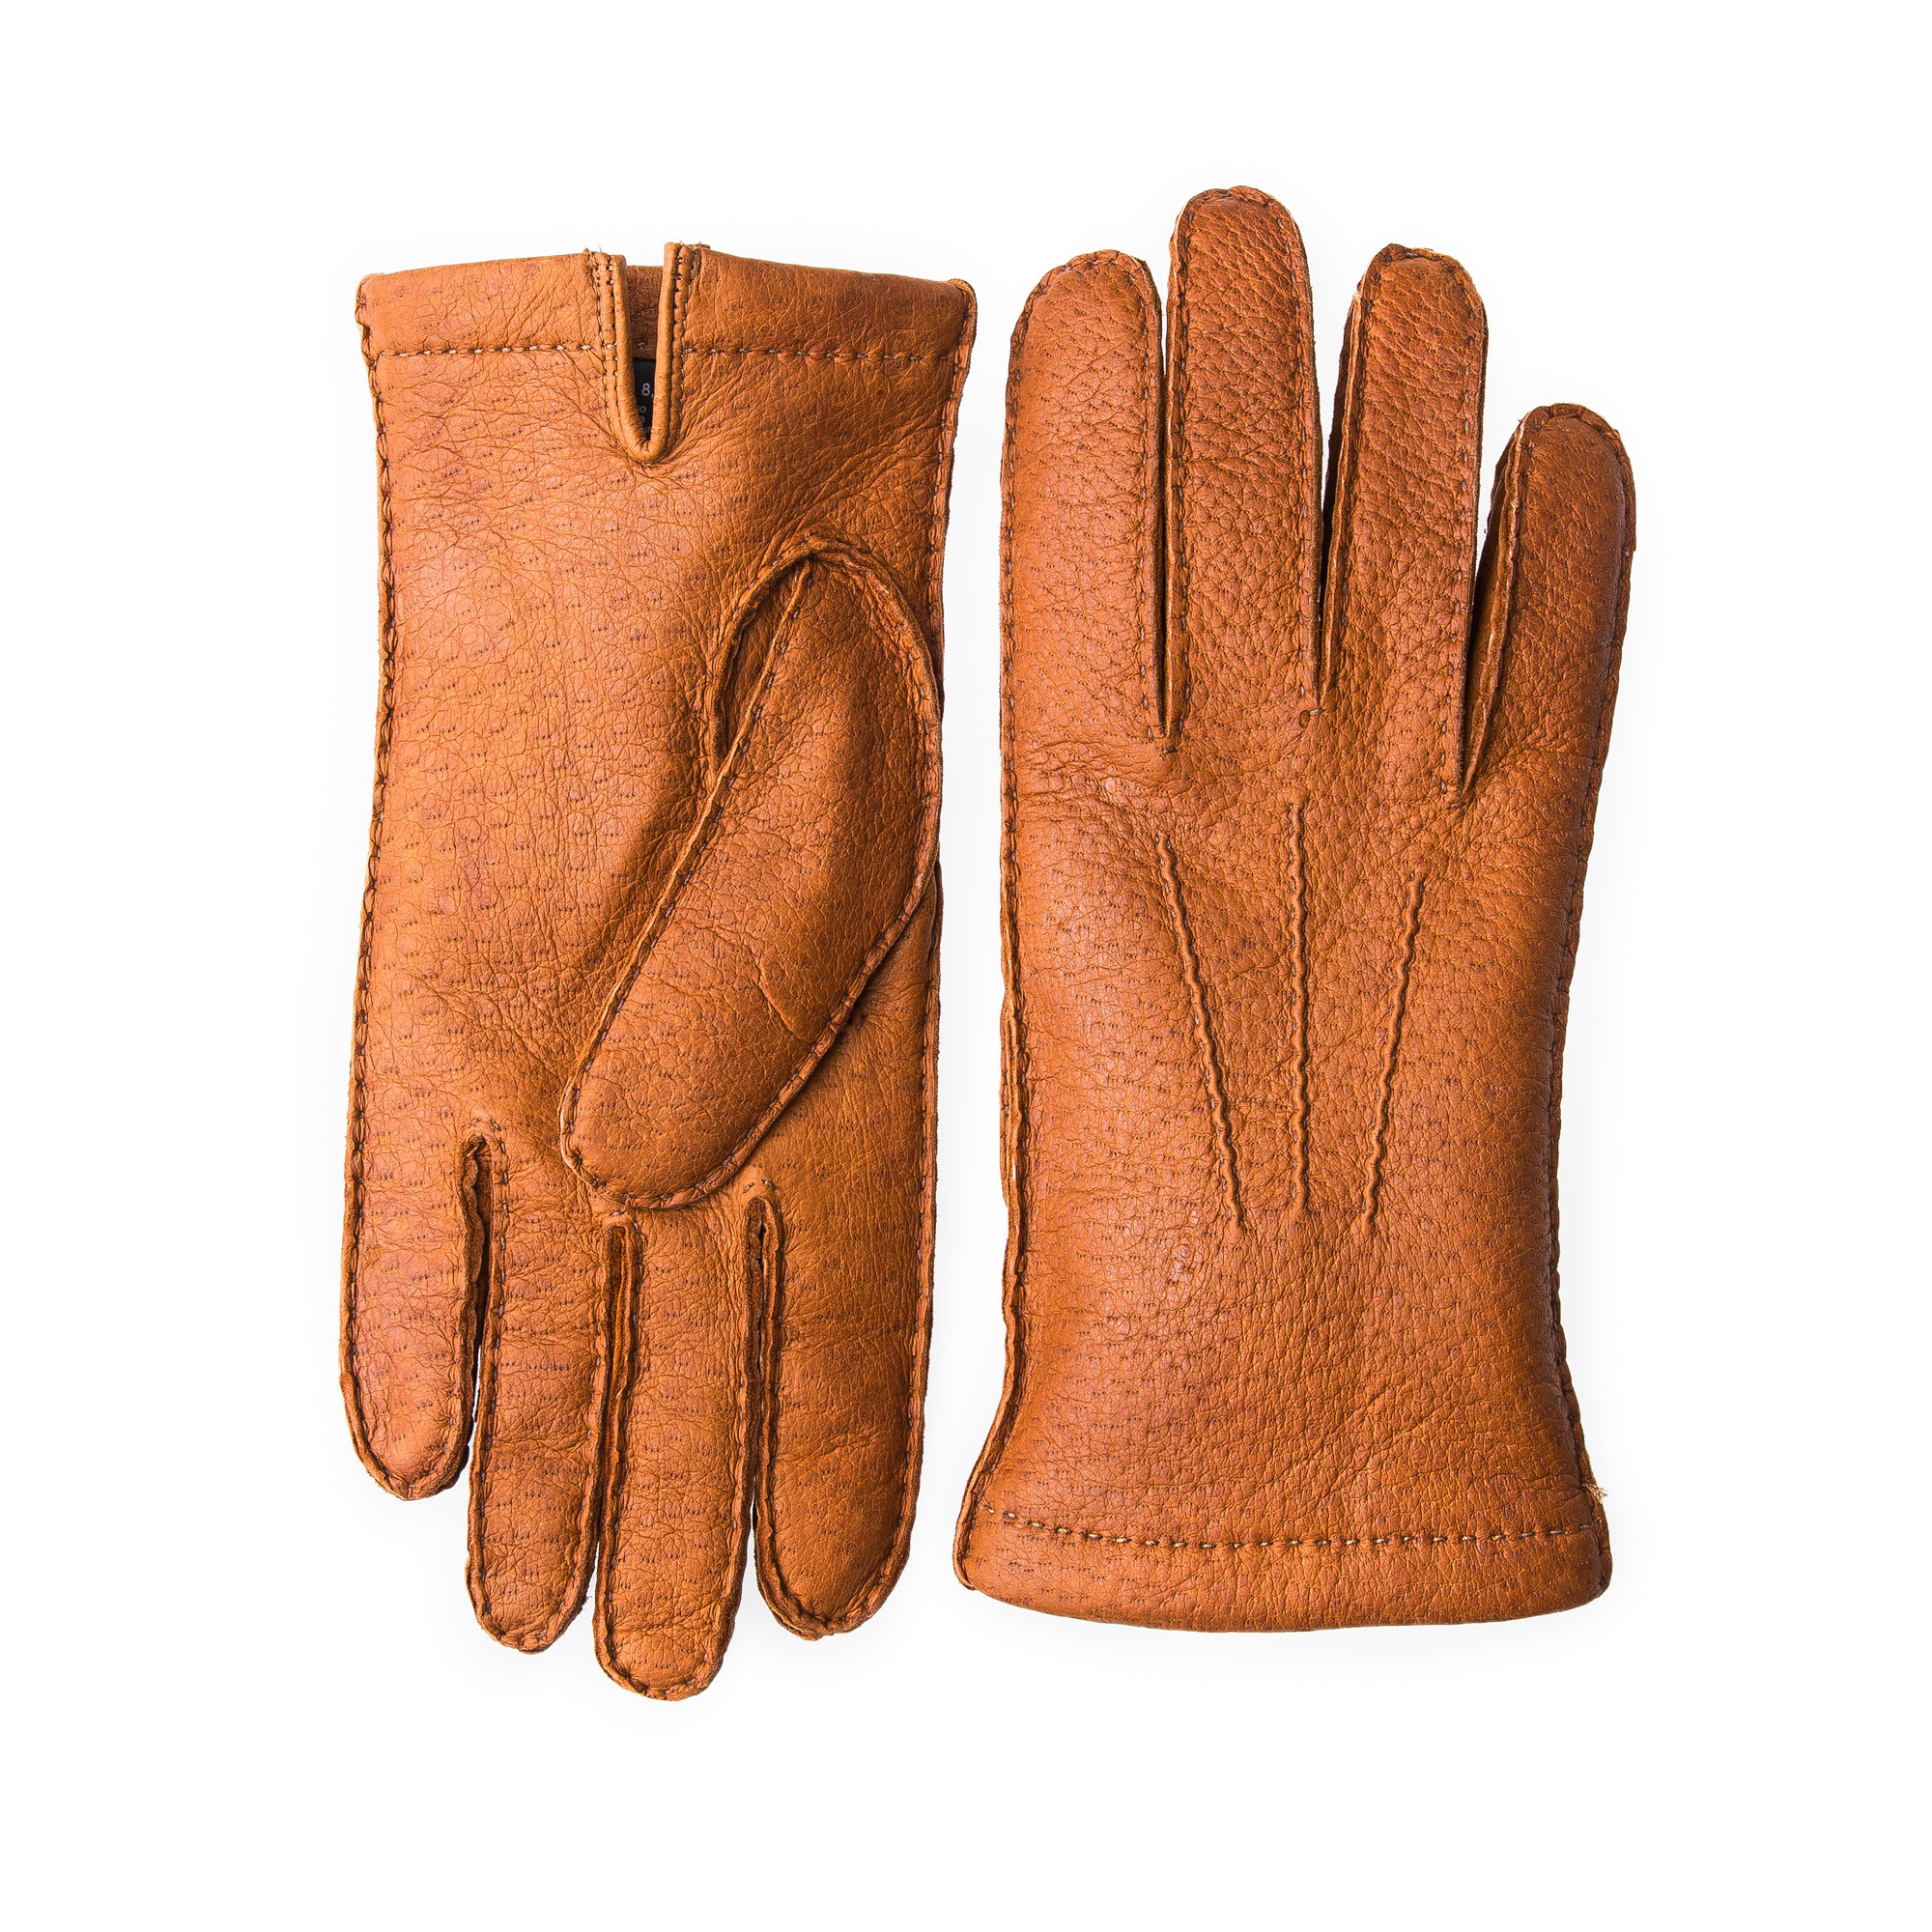 Merola - Men's Cashmere Lined Peccary Leather Gloves